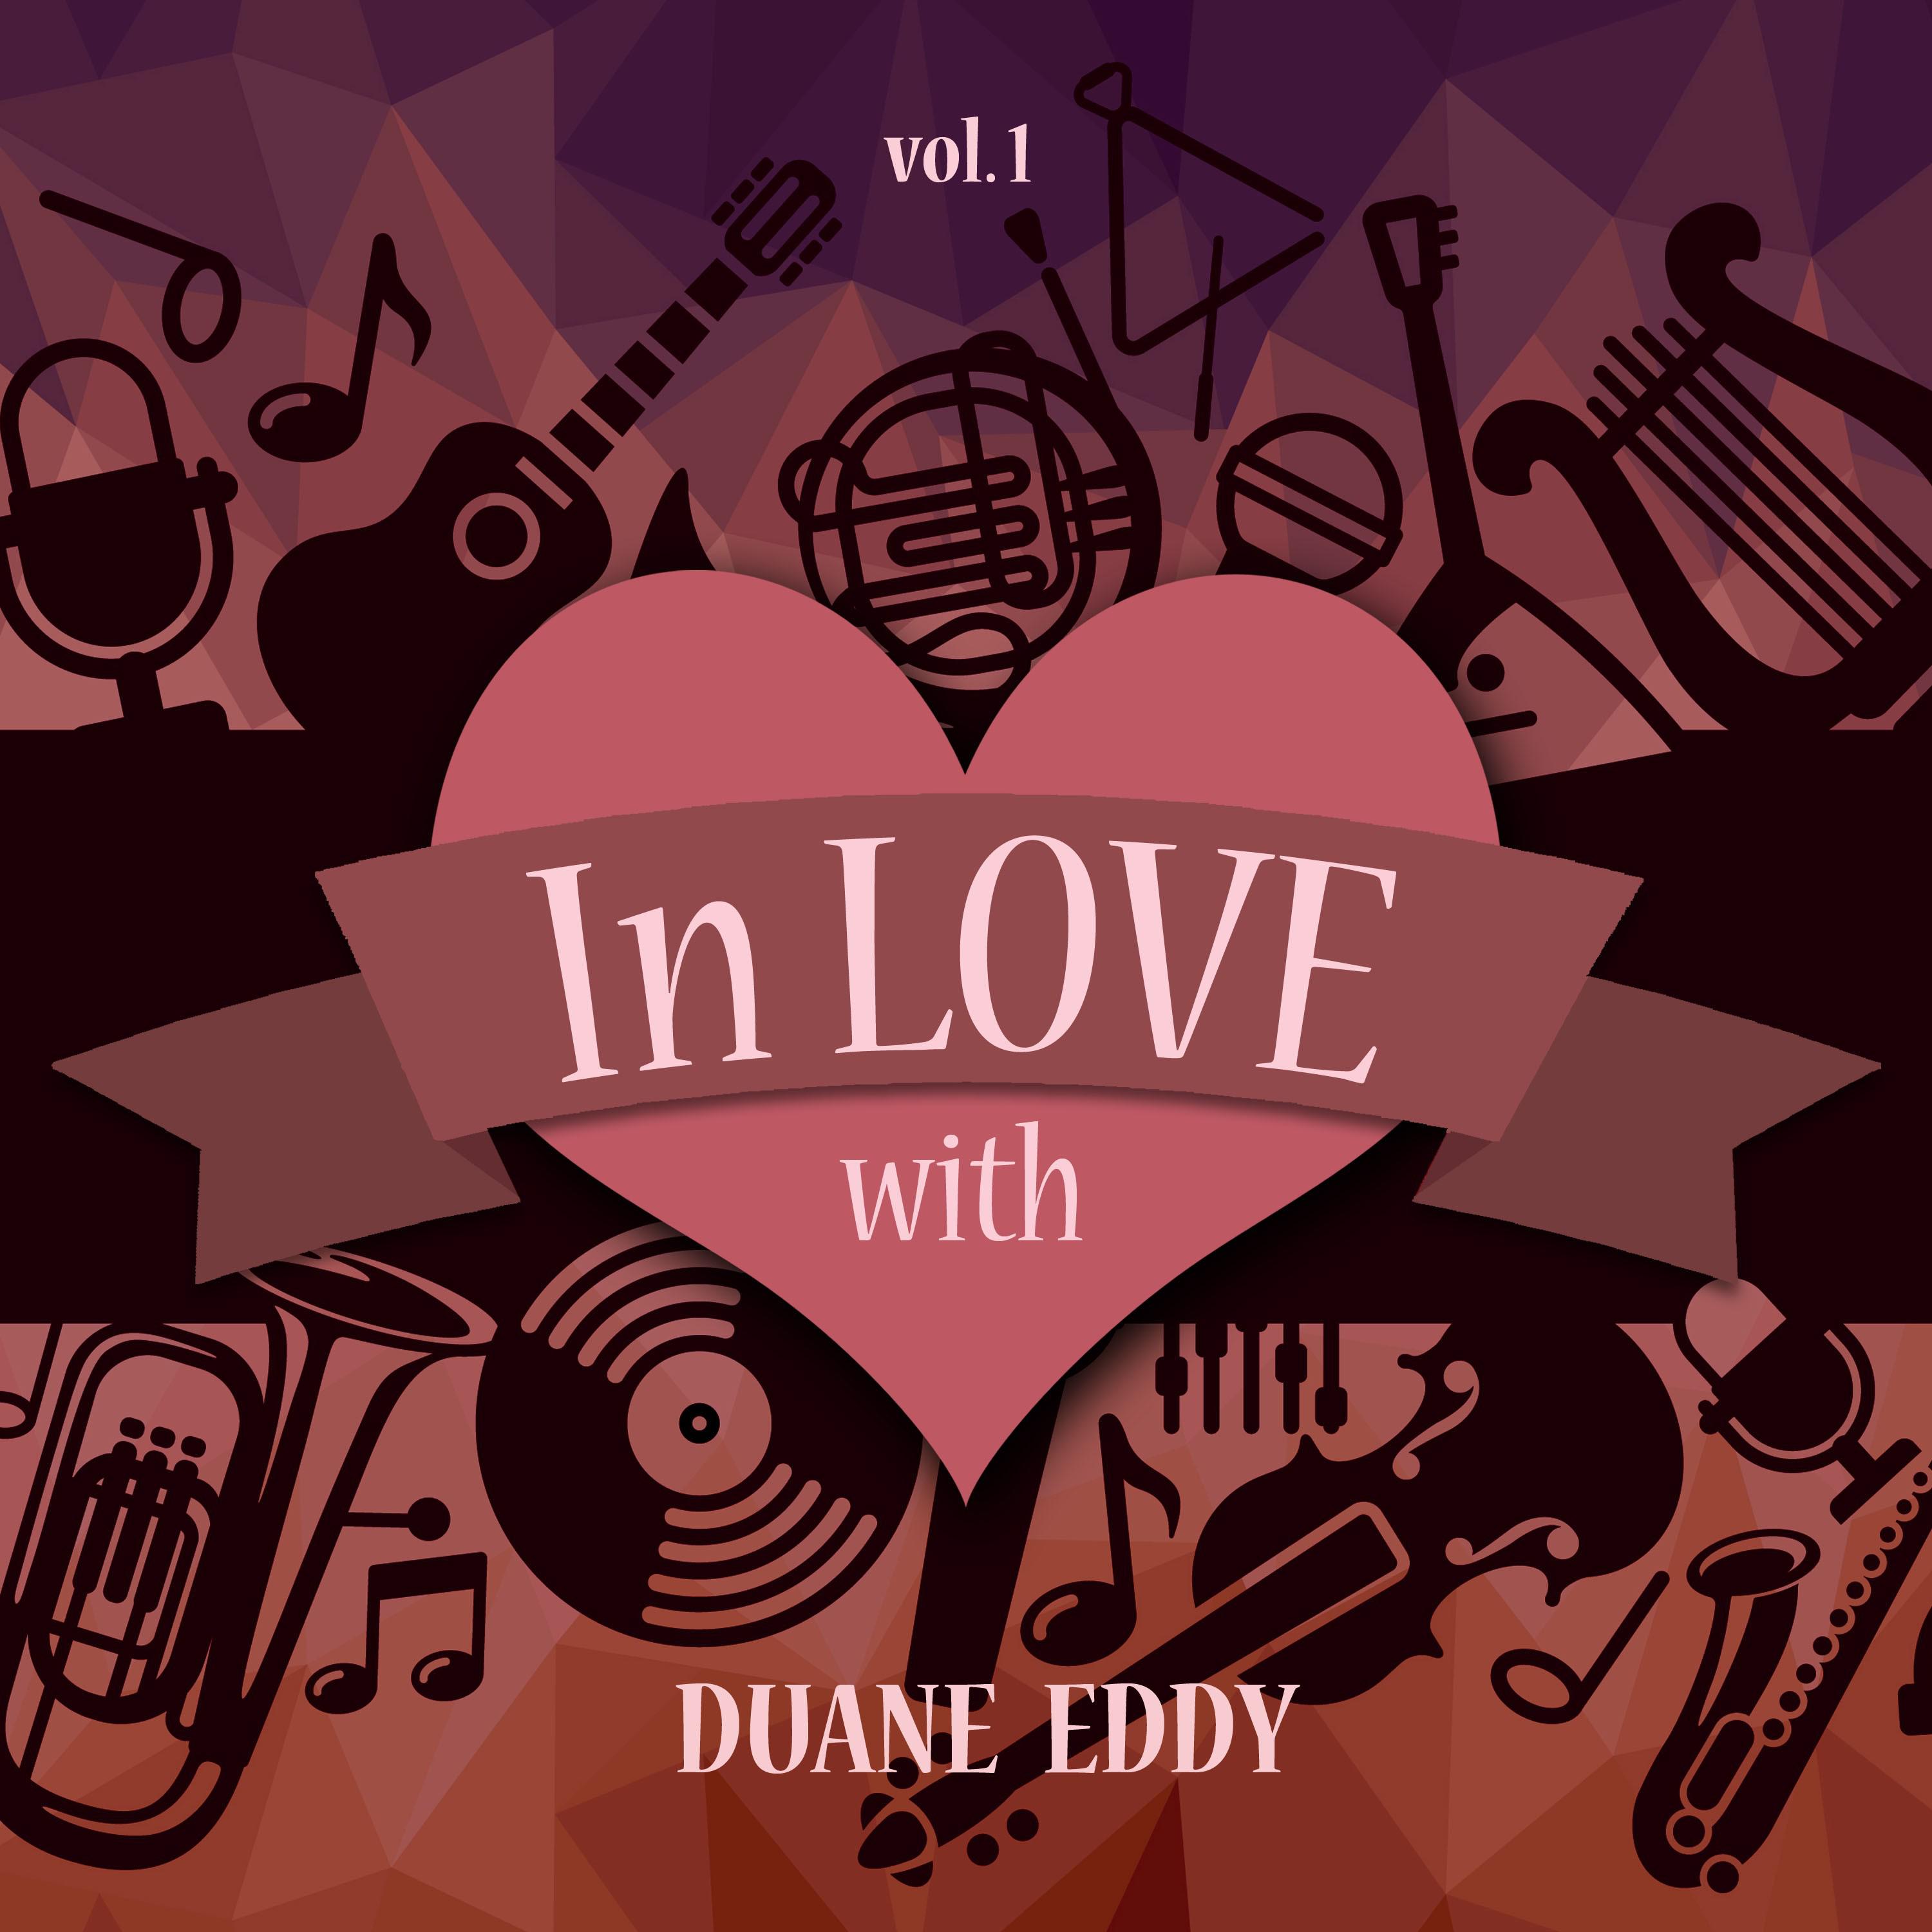 In Love with Duane Eddy, Vol. 1